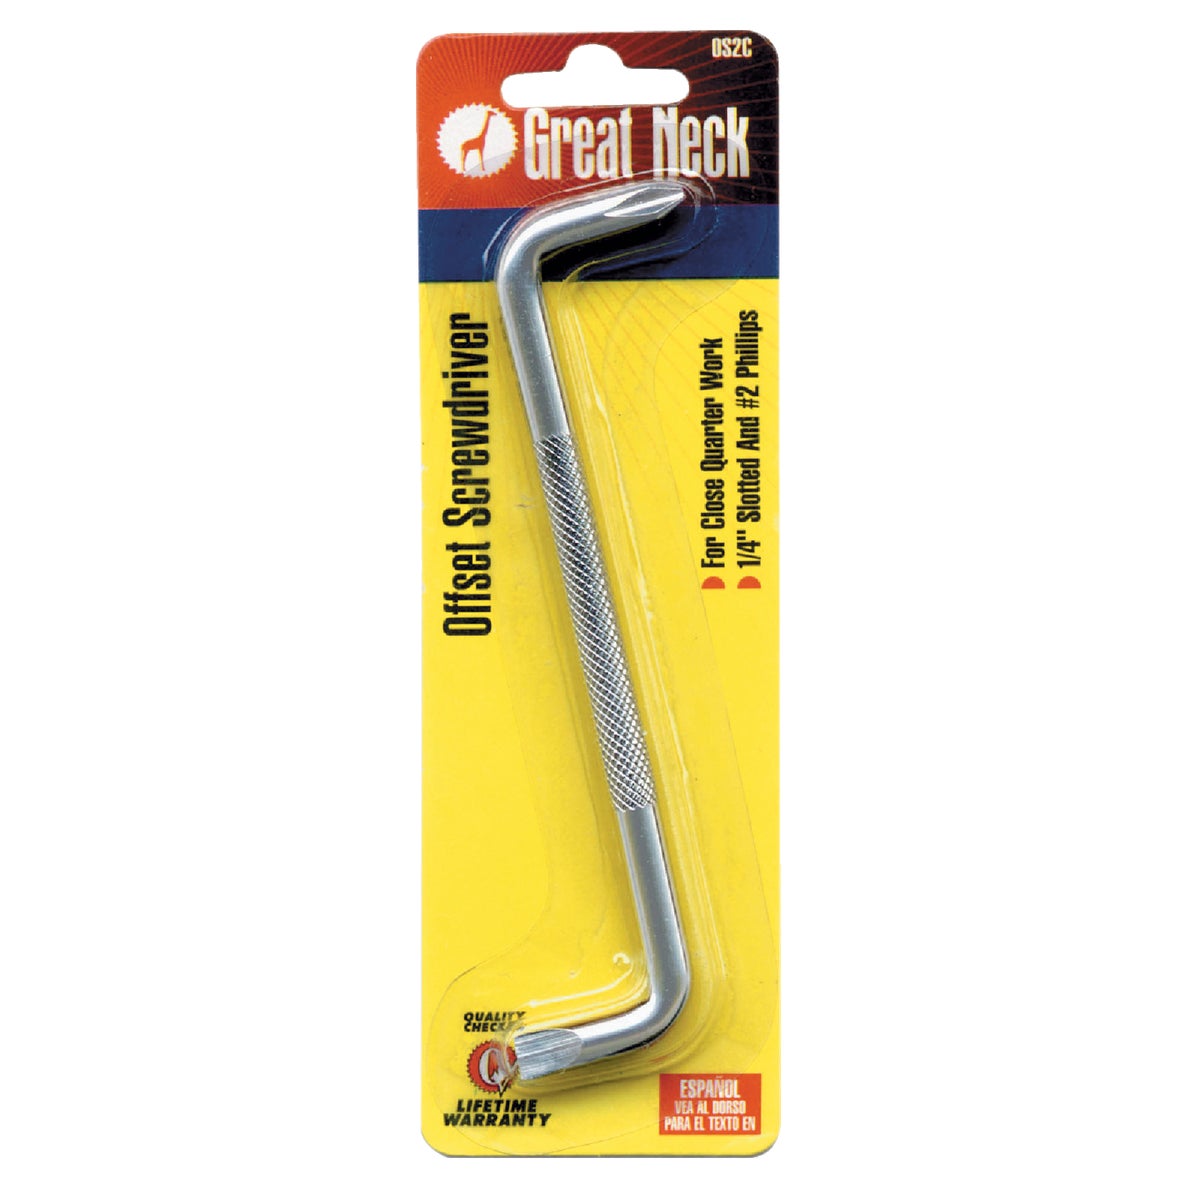 Item 341819, The Great Neck Offset Screwdriver is designed for hard-to-reach 